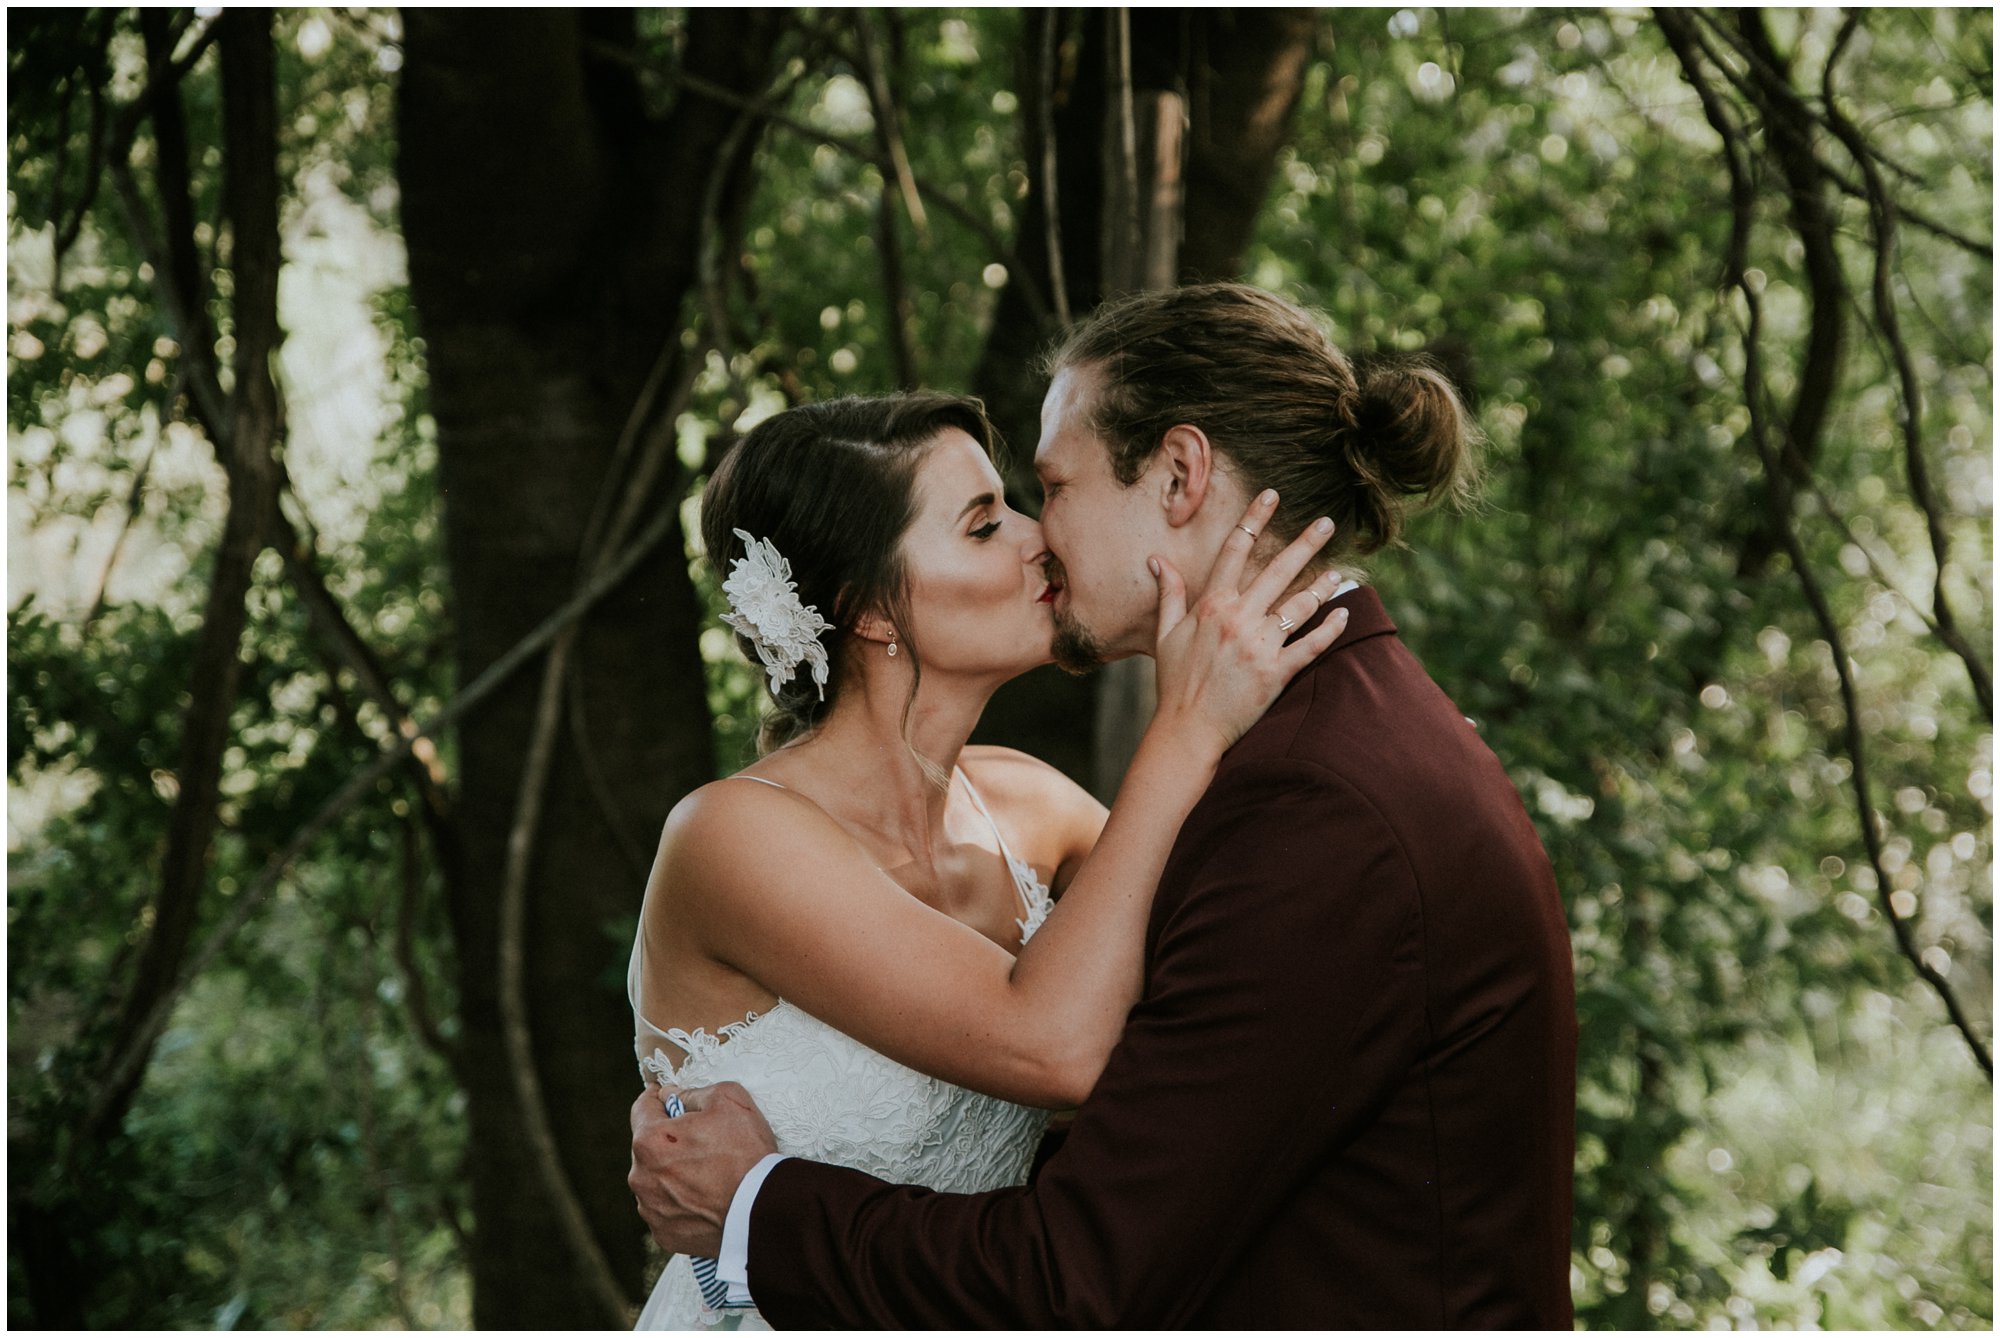 Ceremony at an Outdoor Bohemian Destination Wedding at Francine’s Venue in Hoedspruit Limpopo by Junebug World's Best Photographer Maryke Albertyn Award Winning International Alternative Moody Photography based in Cape Town South Africa